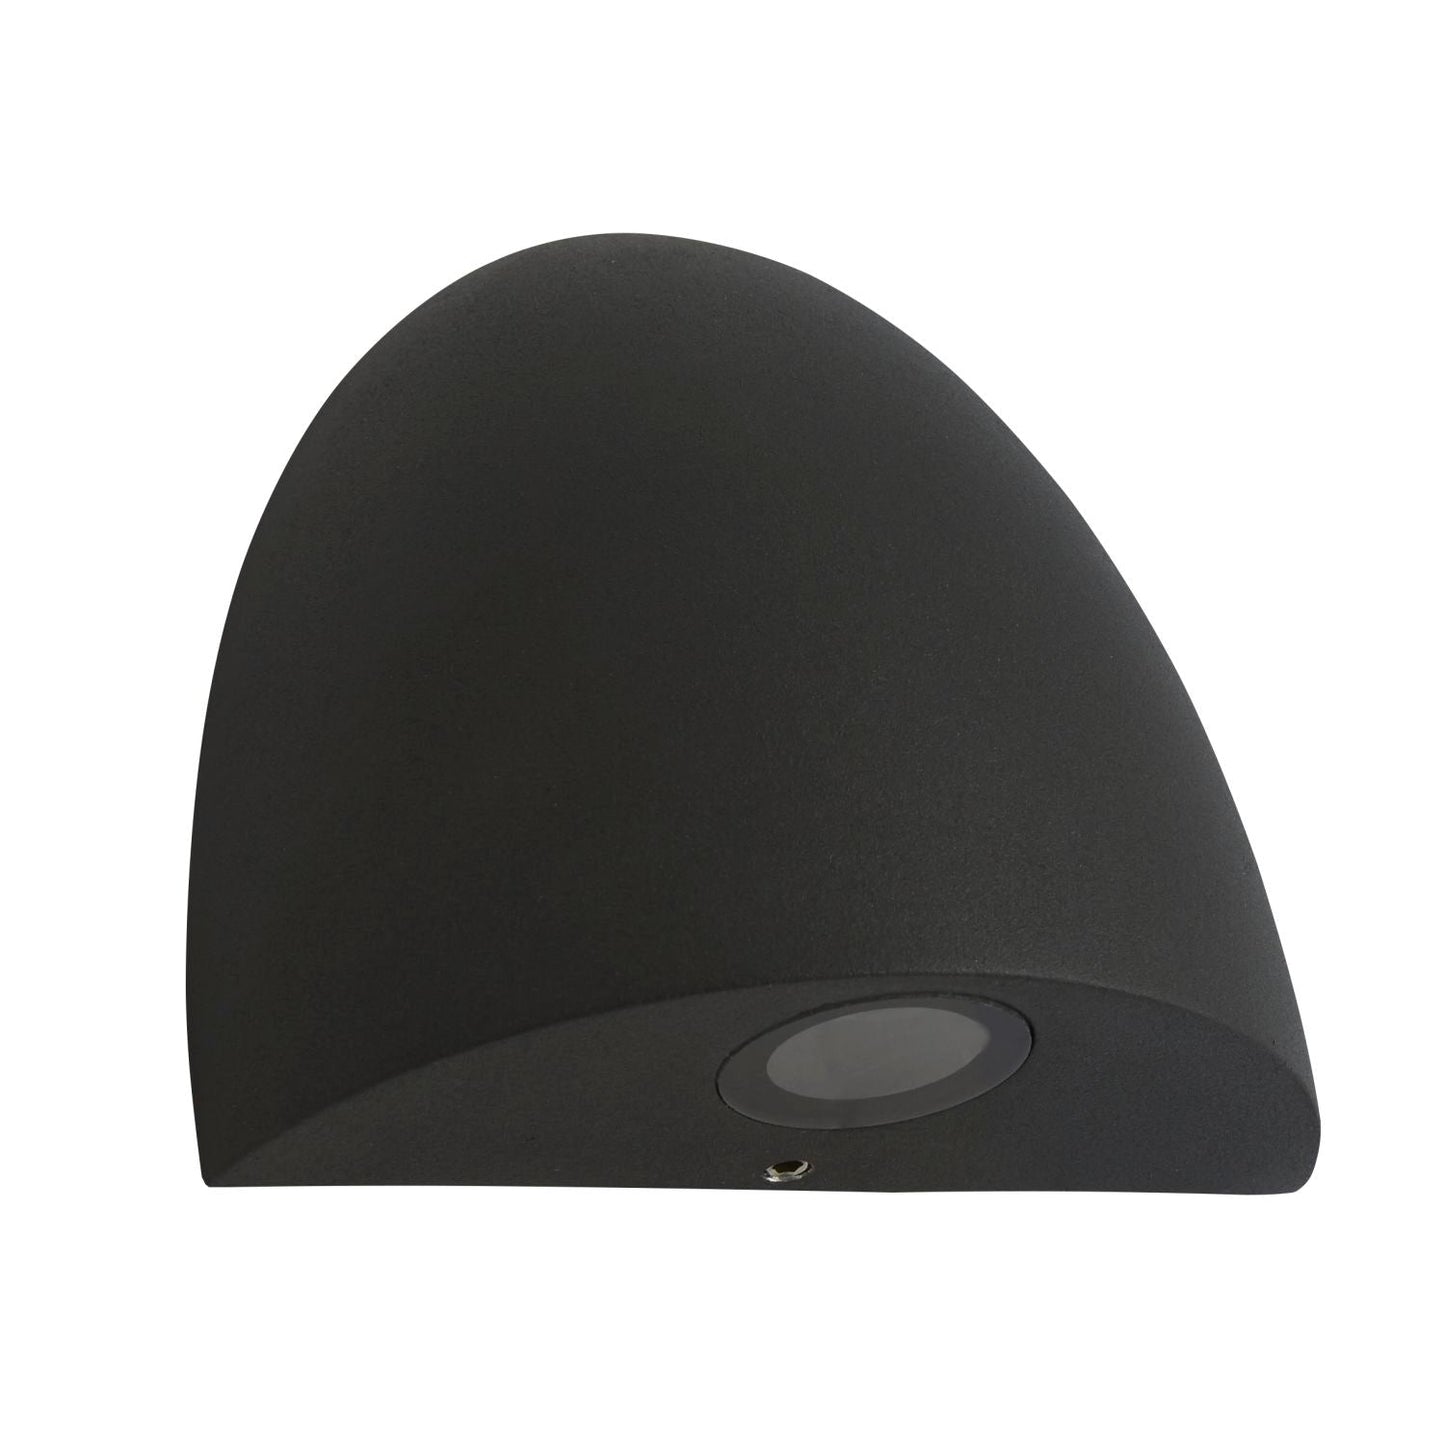 Domed LED Outdoor Wall Light